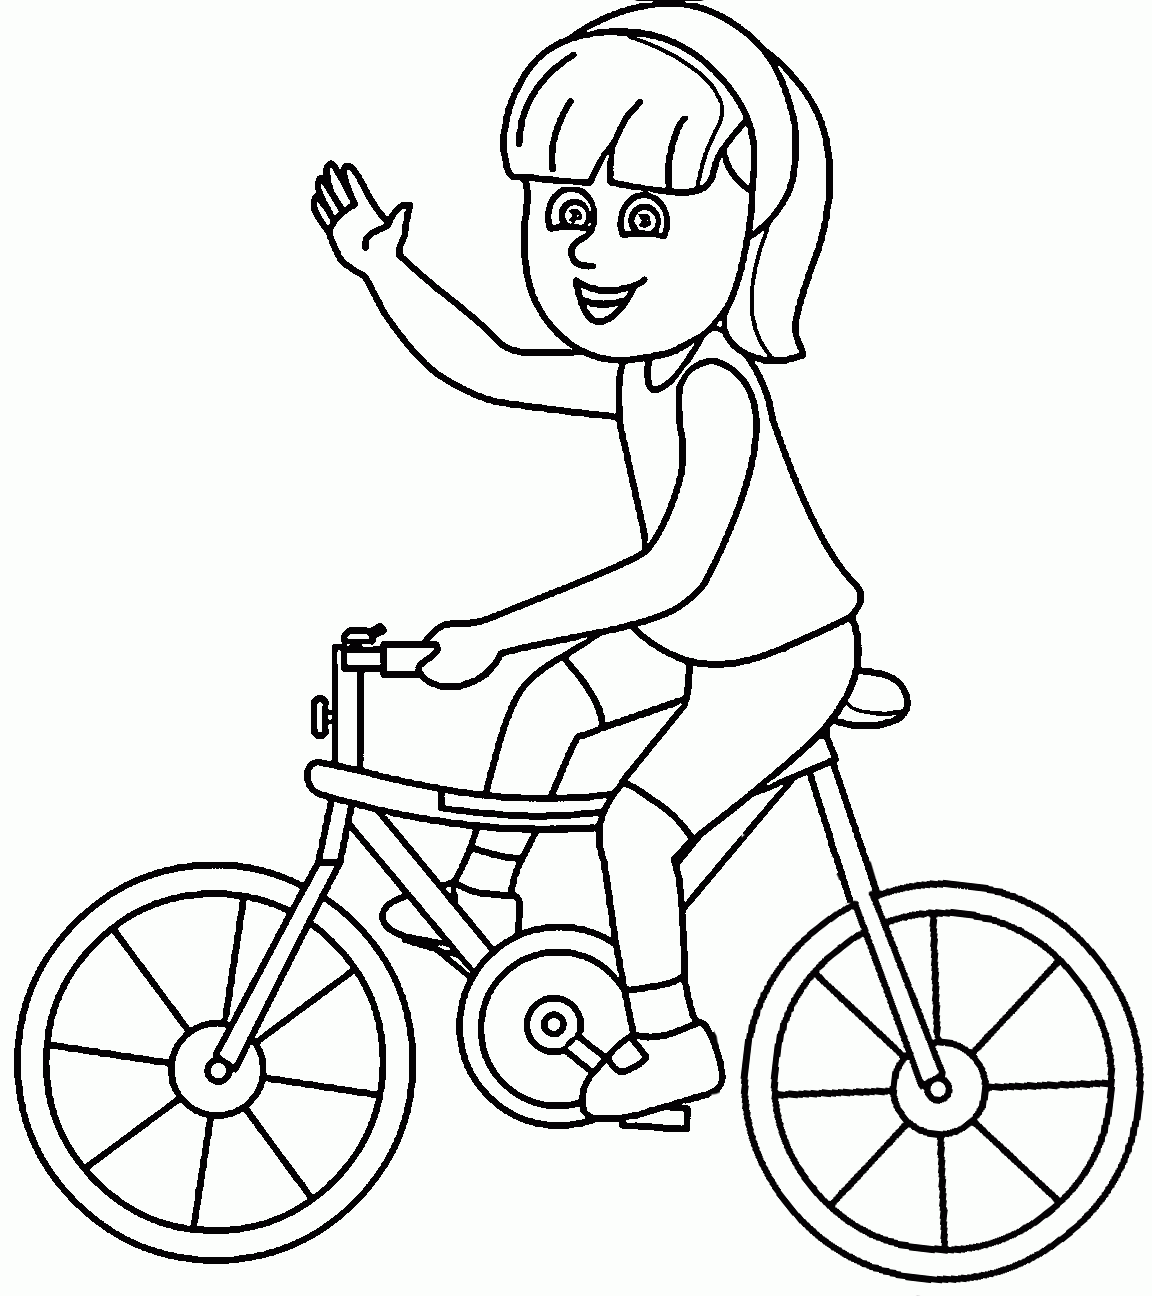 Say Hello On Bicycle For Kids Coloring Page